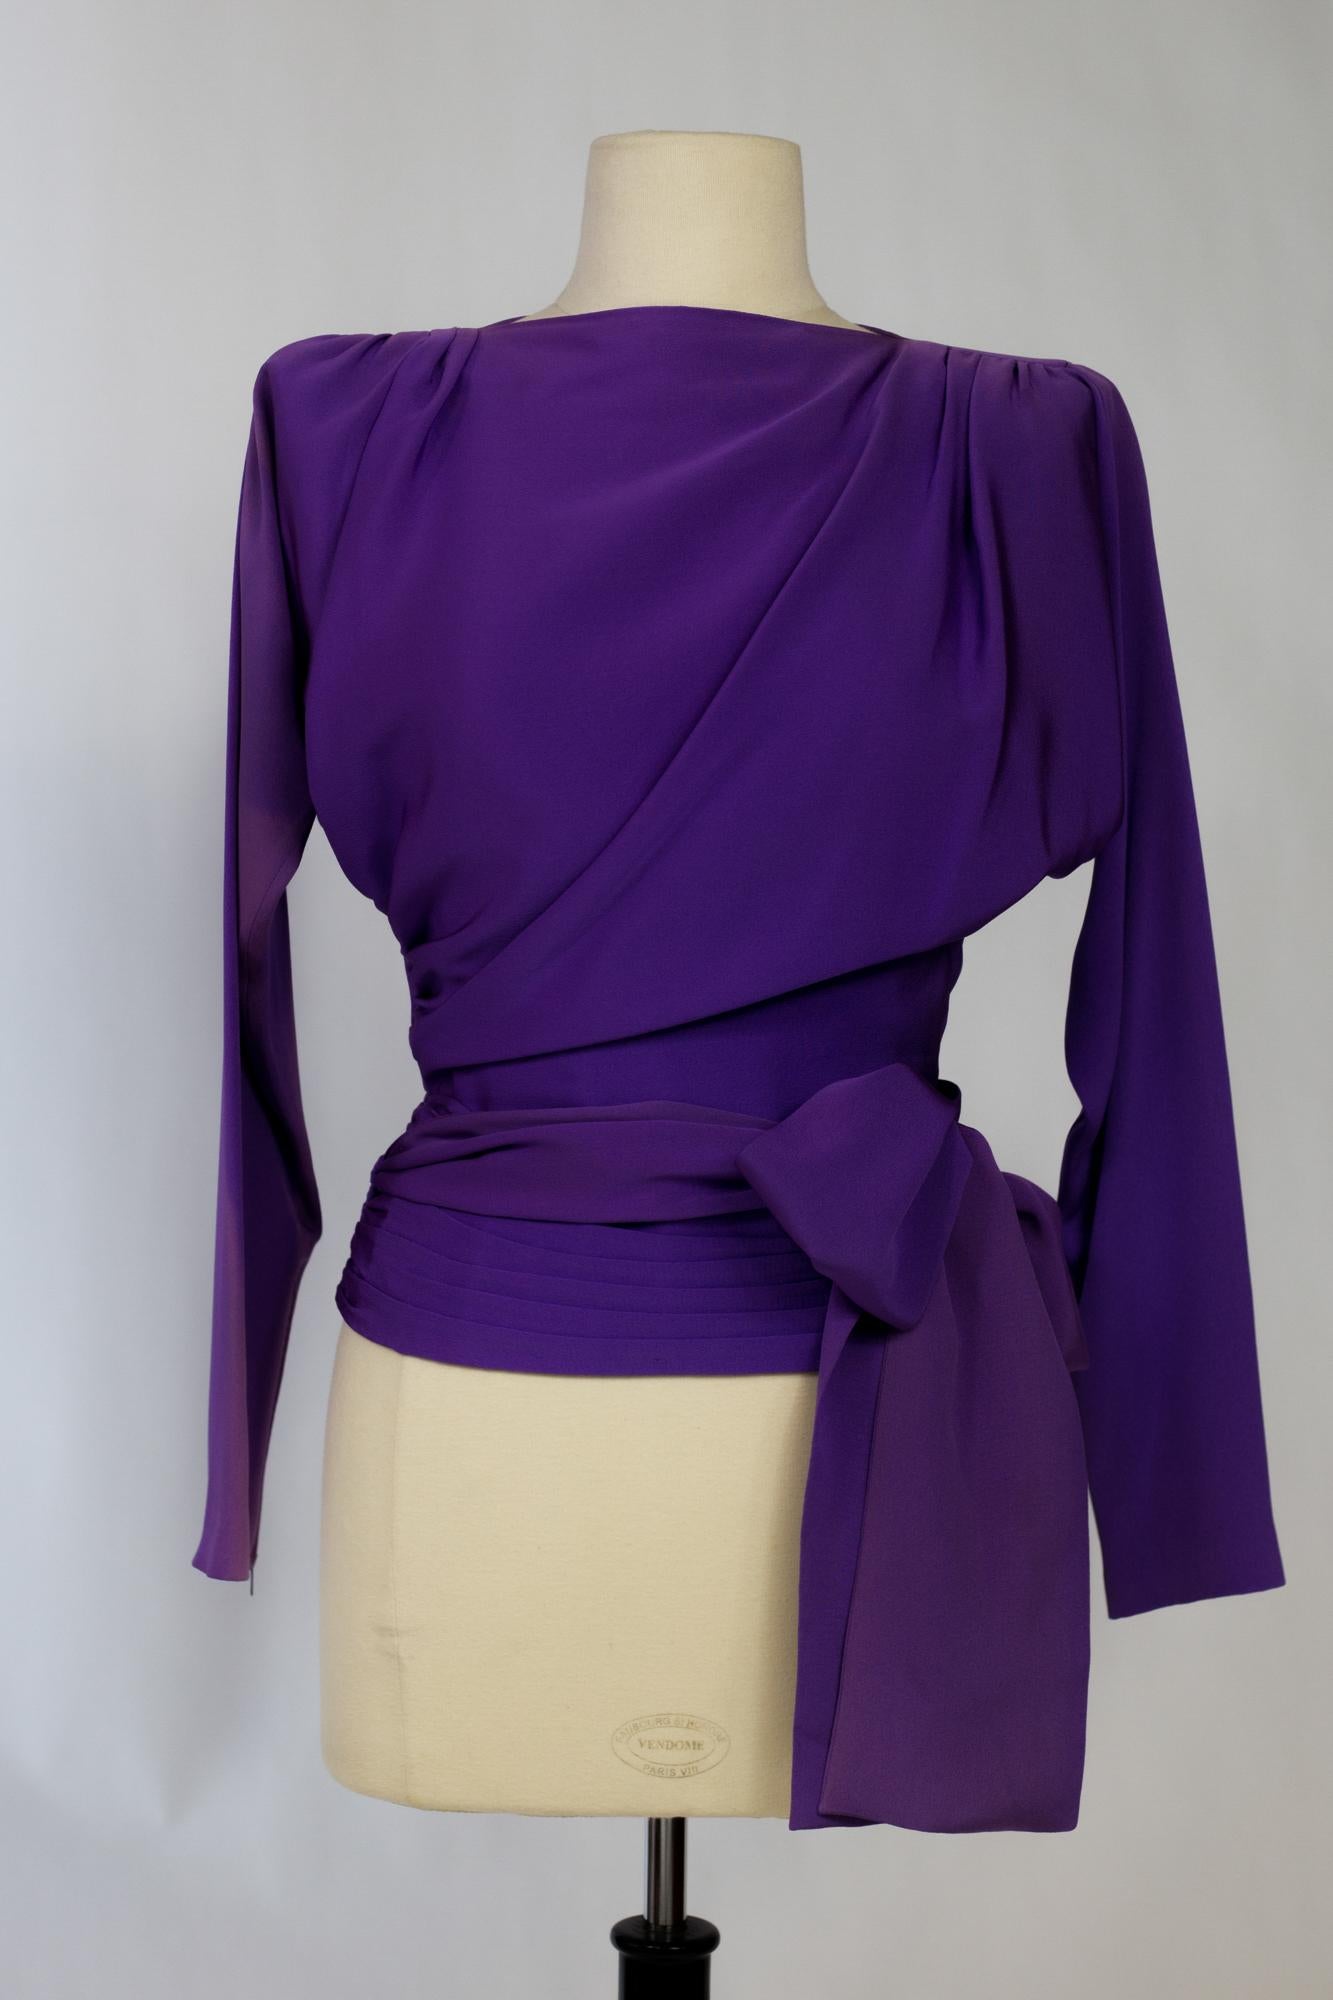 Circa 1990

France

Beautiful evening blouse in mauve silk Ottoman by Yves Saint Laurent Haute Couture. High waisted bustier with ragging long sleeves, shoulder pads and buttoned slit at the back neck. Elegant draping from the shoulders and wide